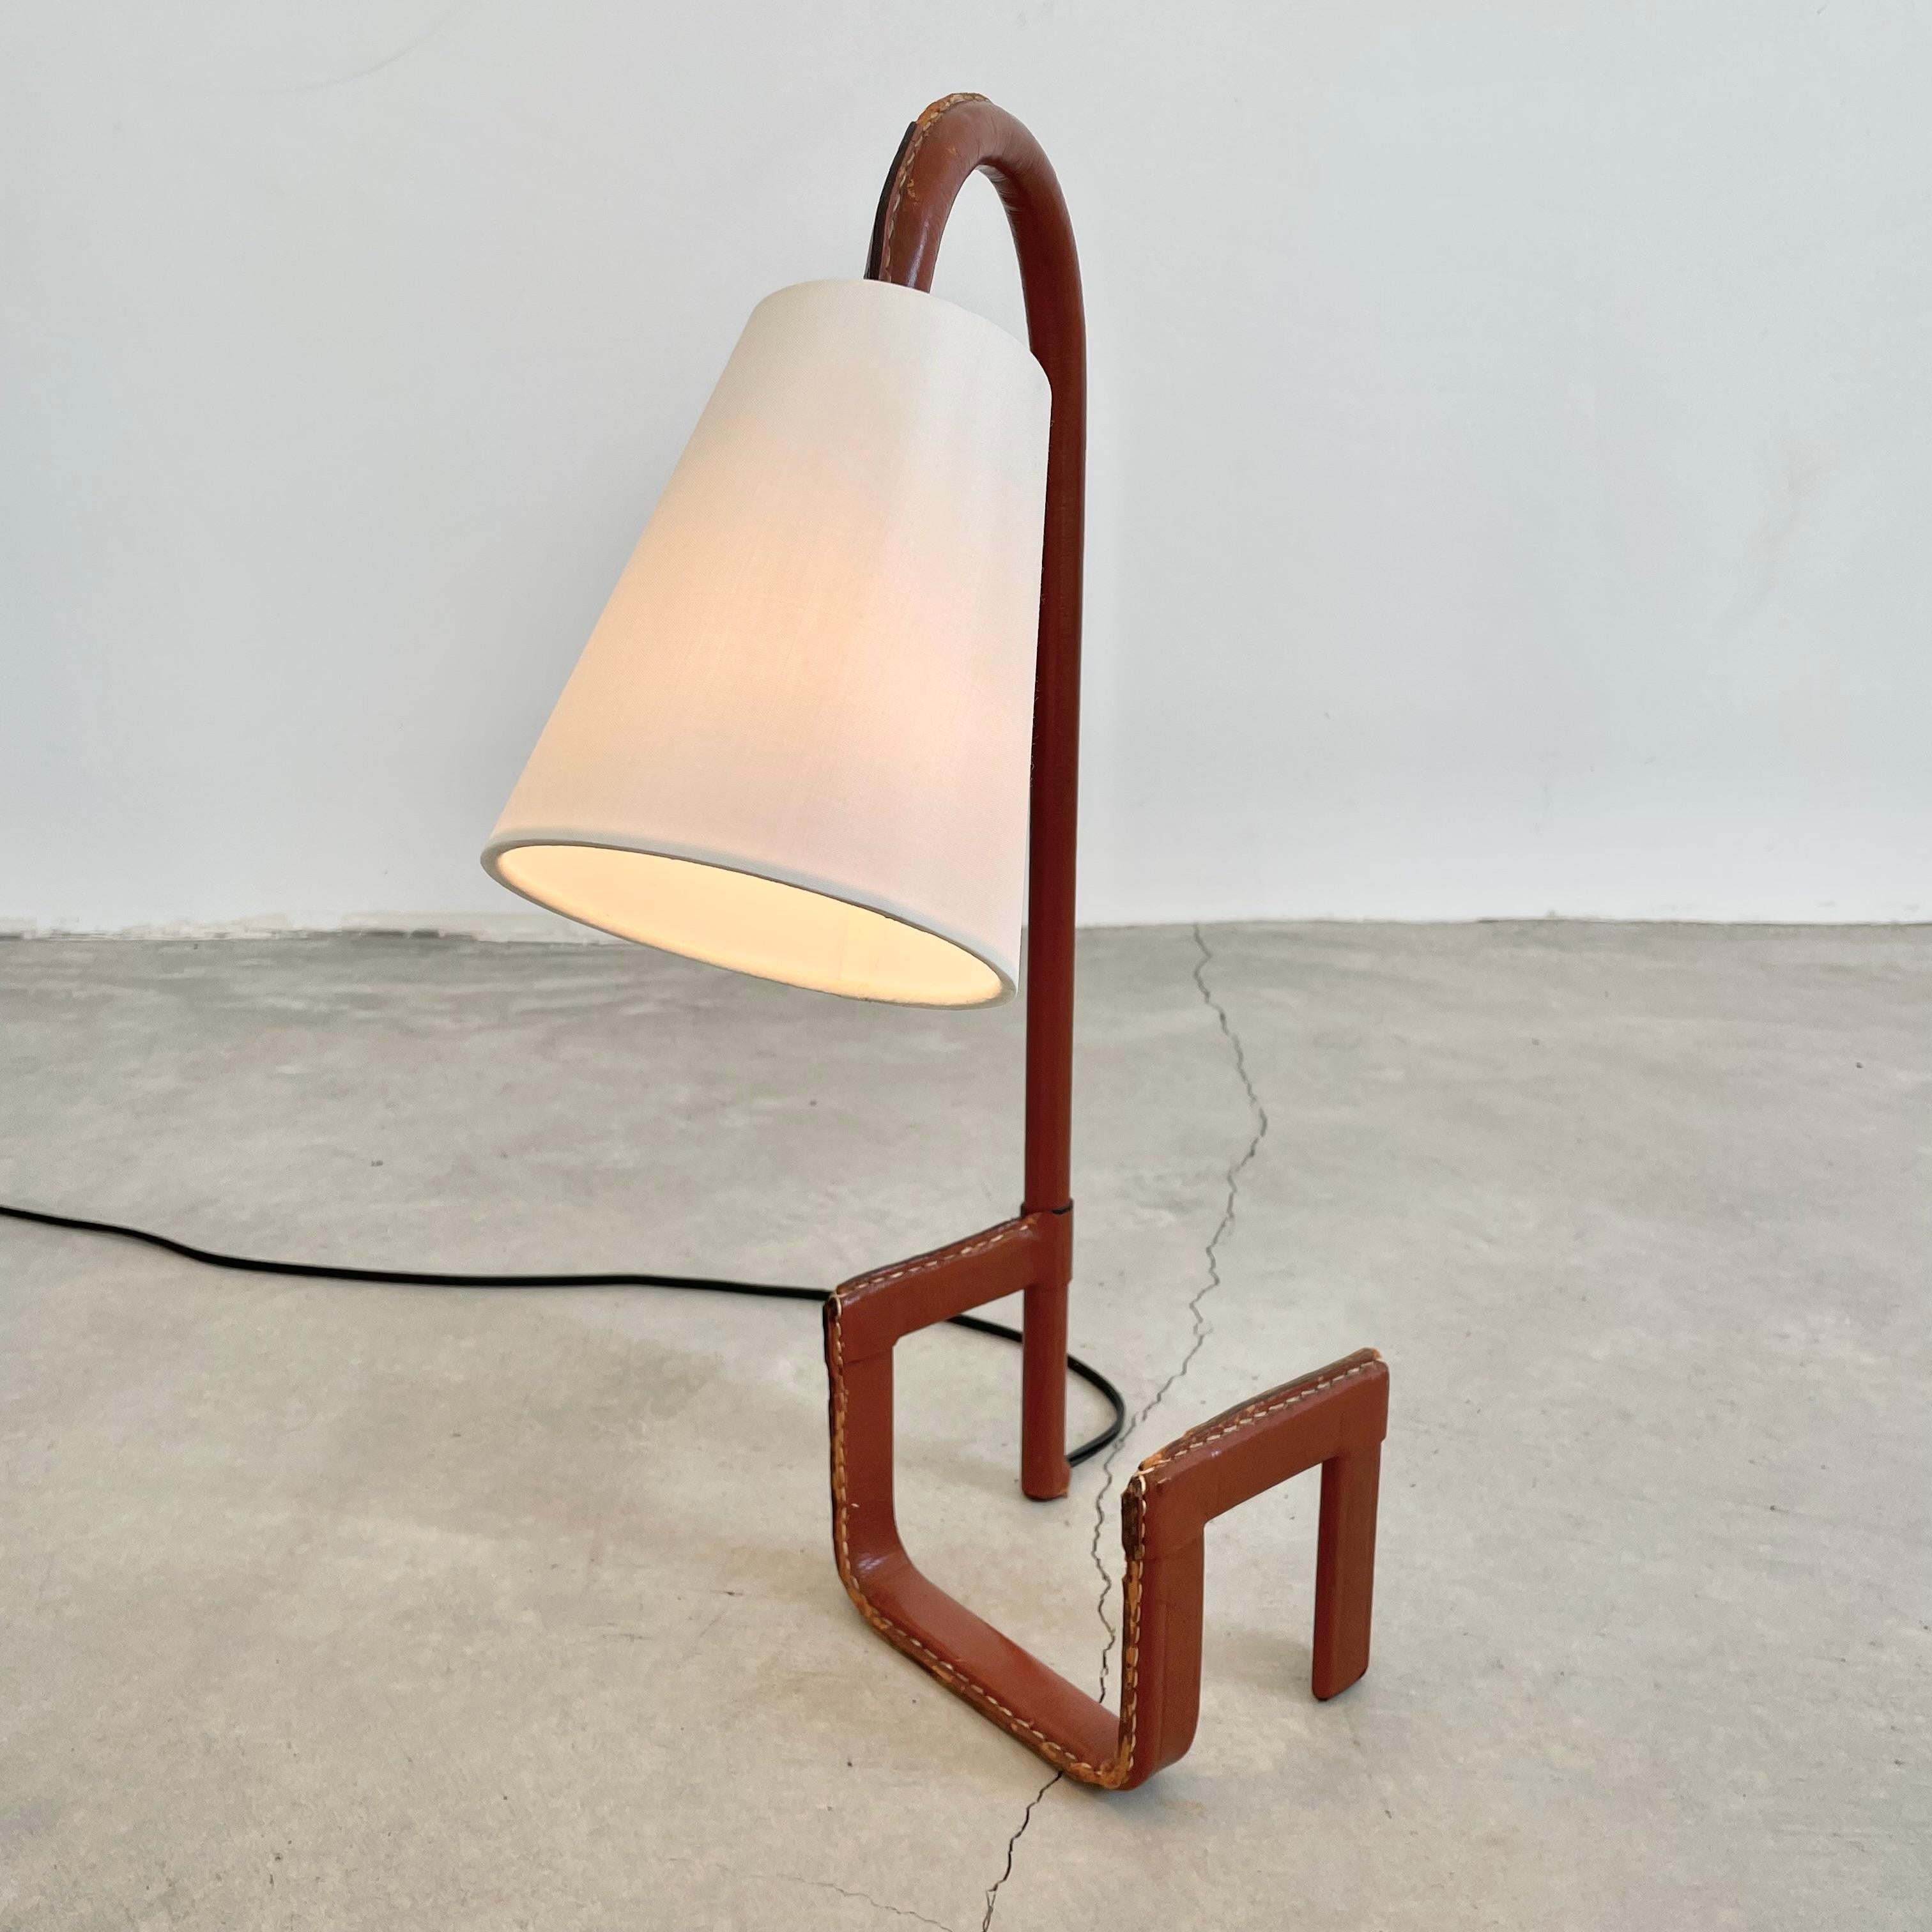 Mid-20th Century Jacques Adnet Leather Table Lamp with Built-In Bookshelf, 1950s France For Sale